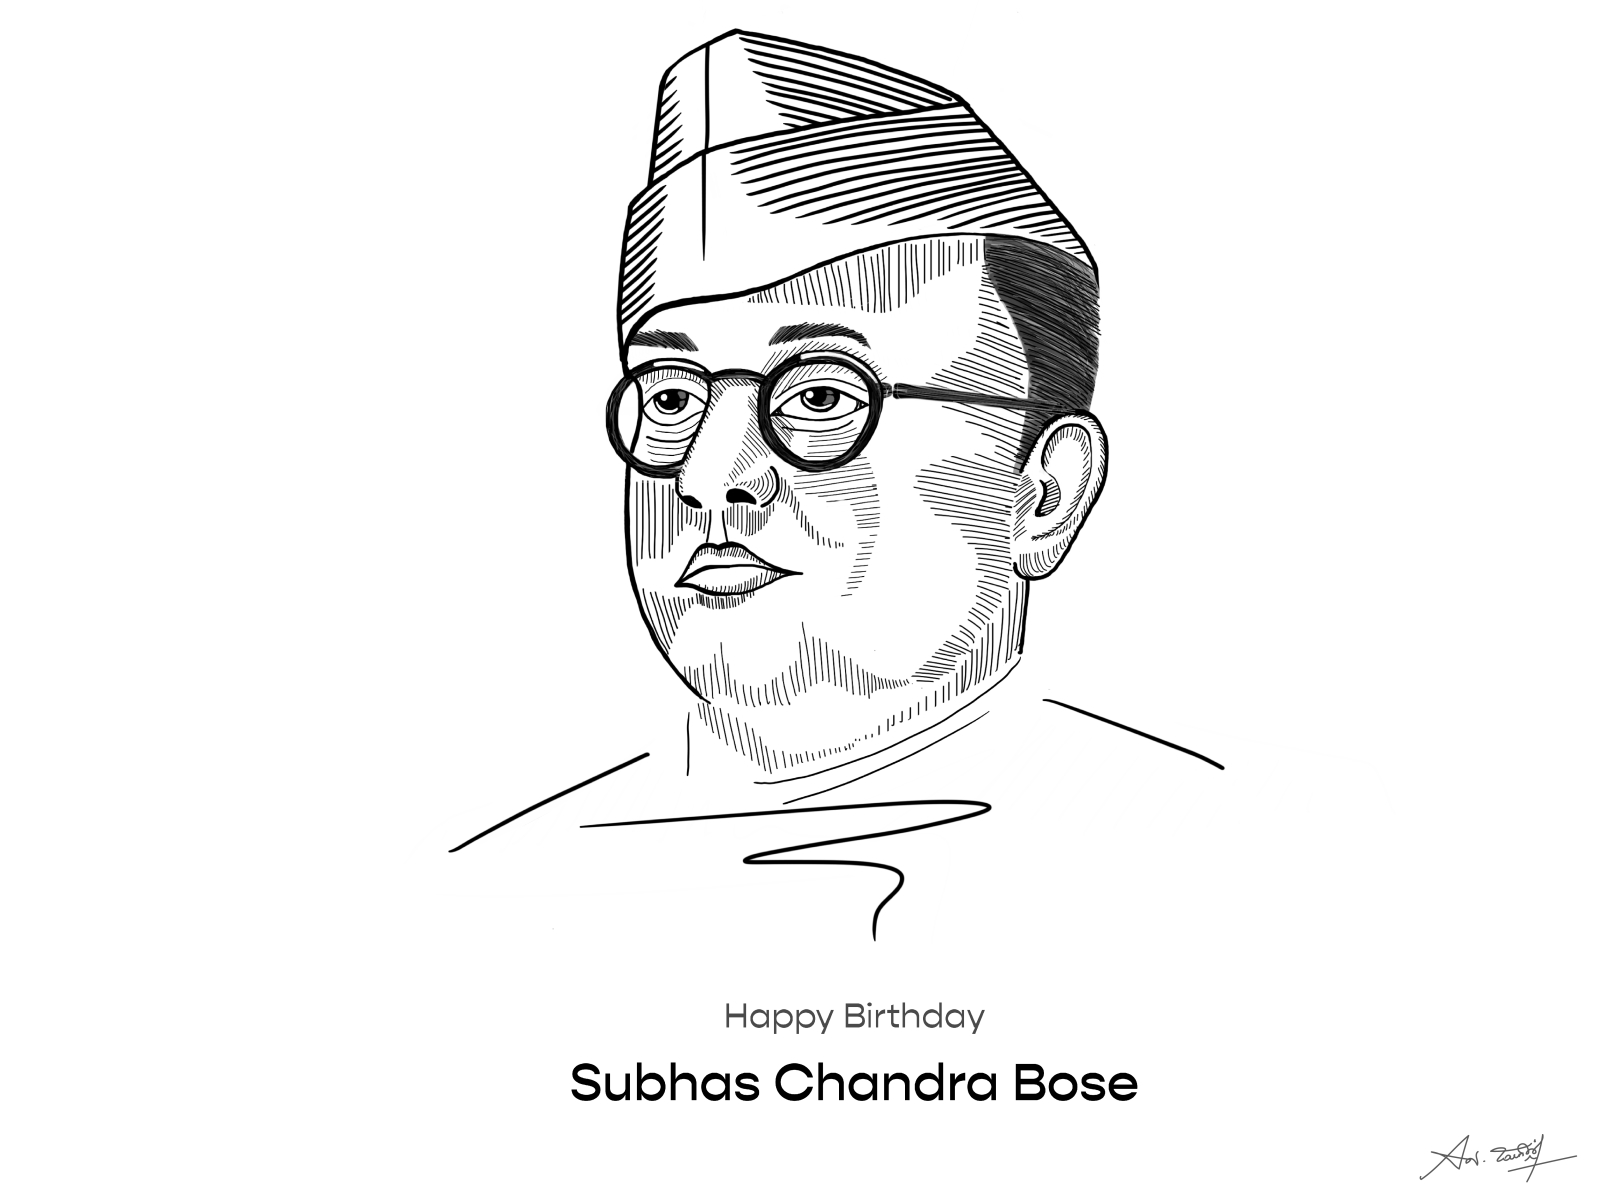 Netaji Subhash Chandra Bose's famous speech 'Give me blood, I promise you  freedom' | Parenting News - The Indian Express